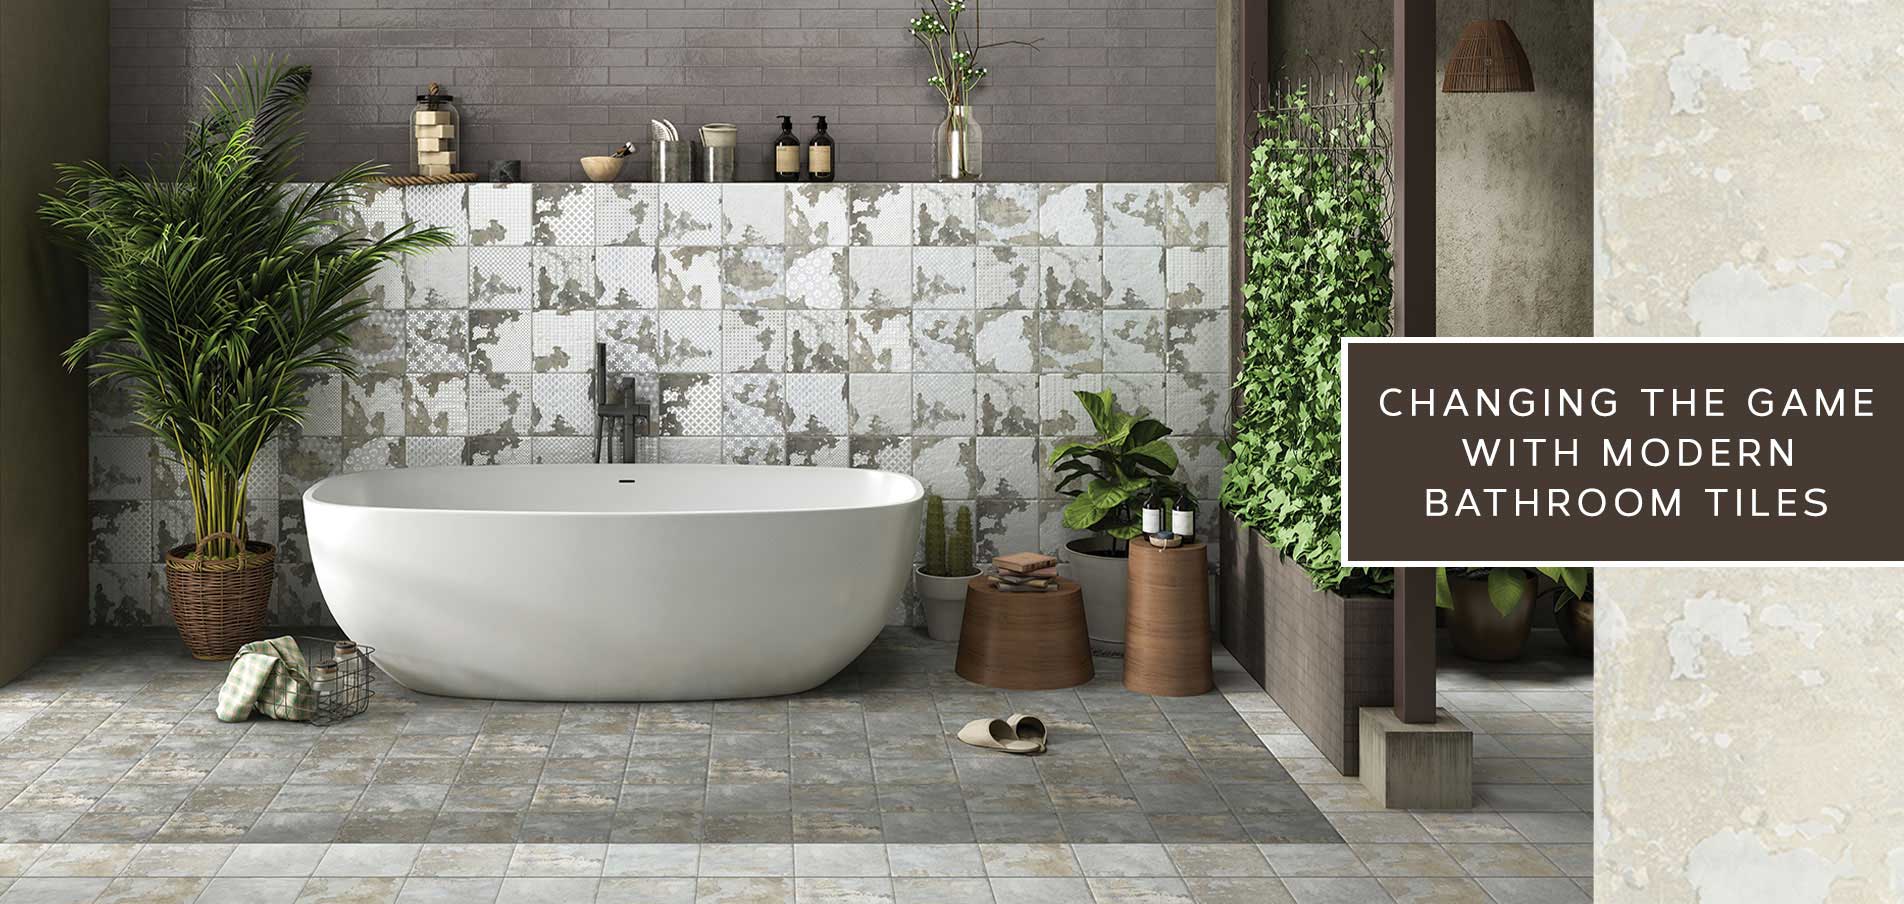 Changing the game with modern bathroom tiles